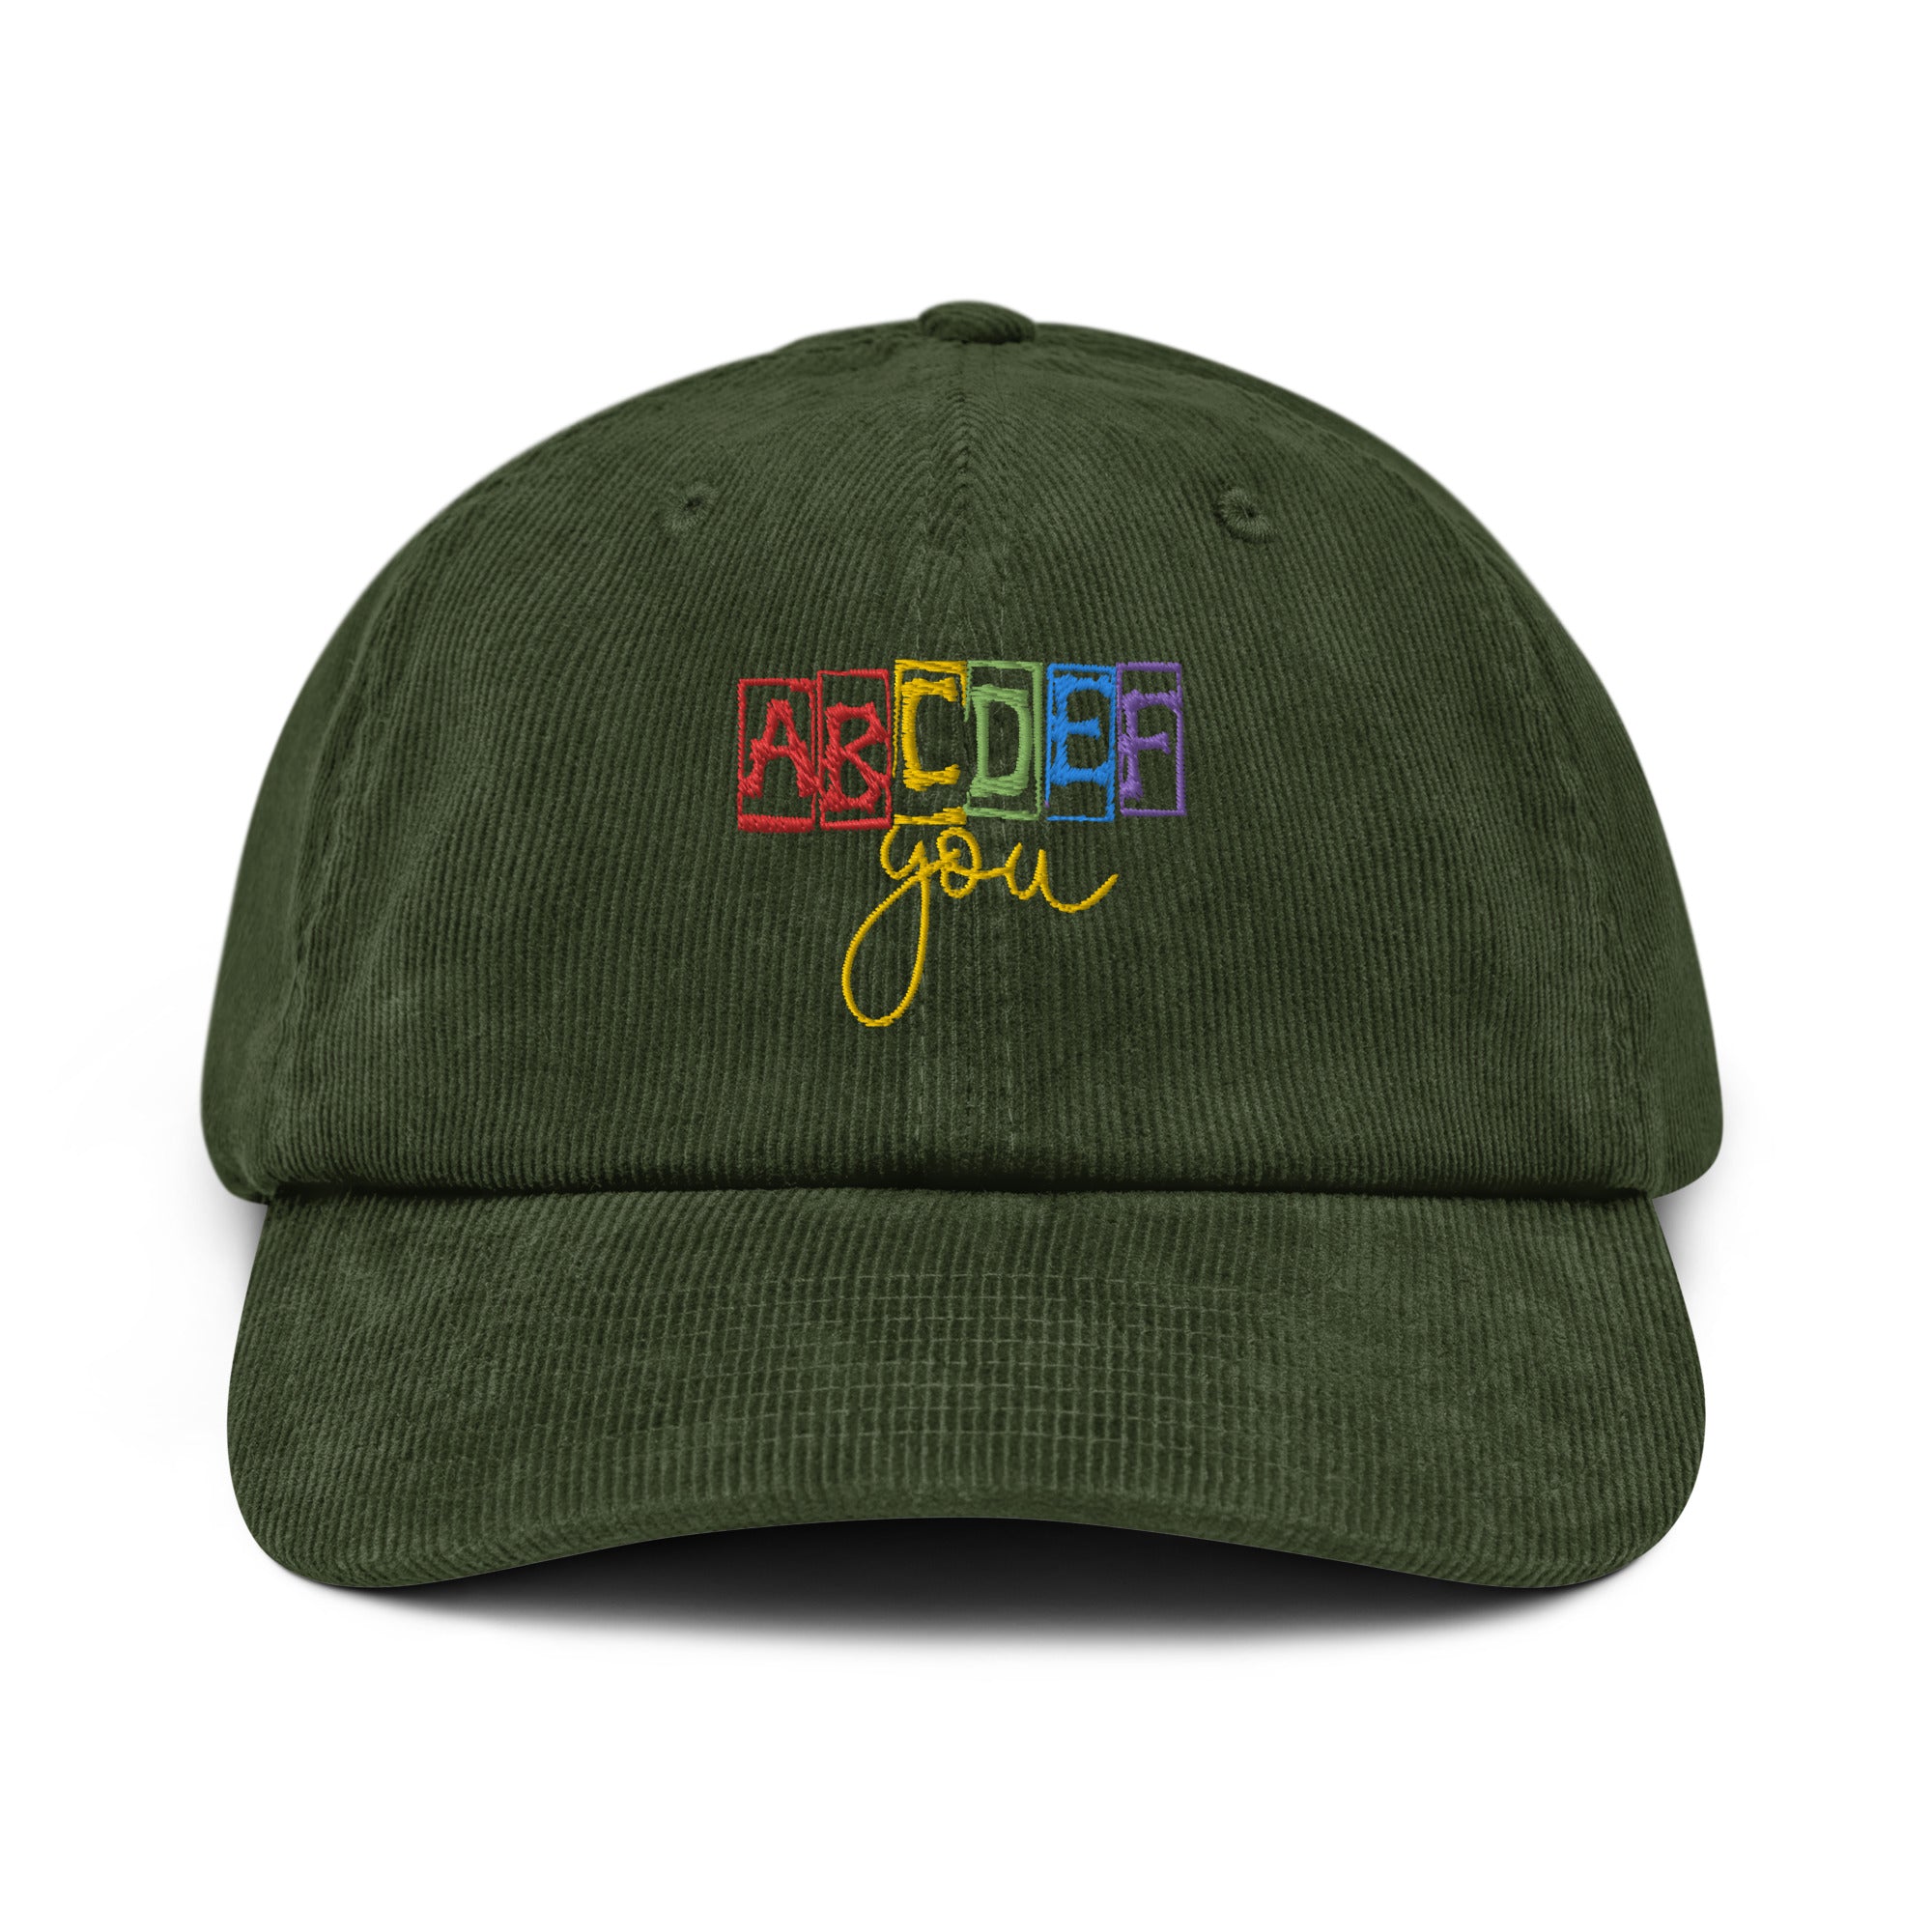 Abcdef You Corduroy Hat - Ty0510222